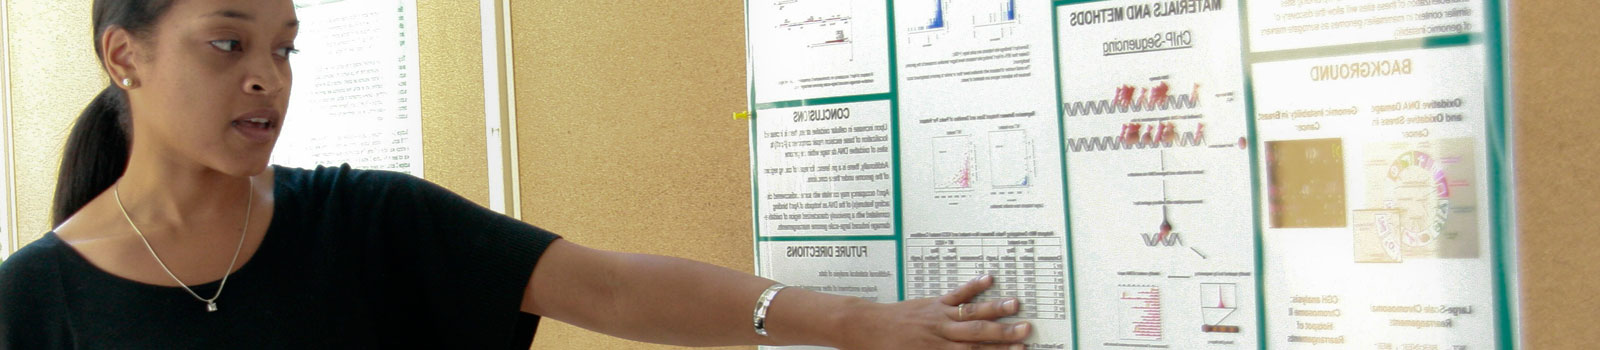 A woman speaking and pointing at a research poster